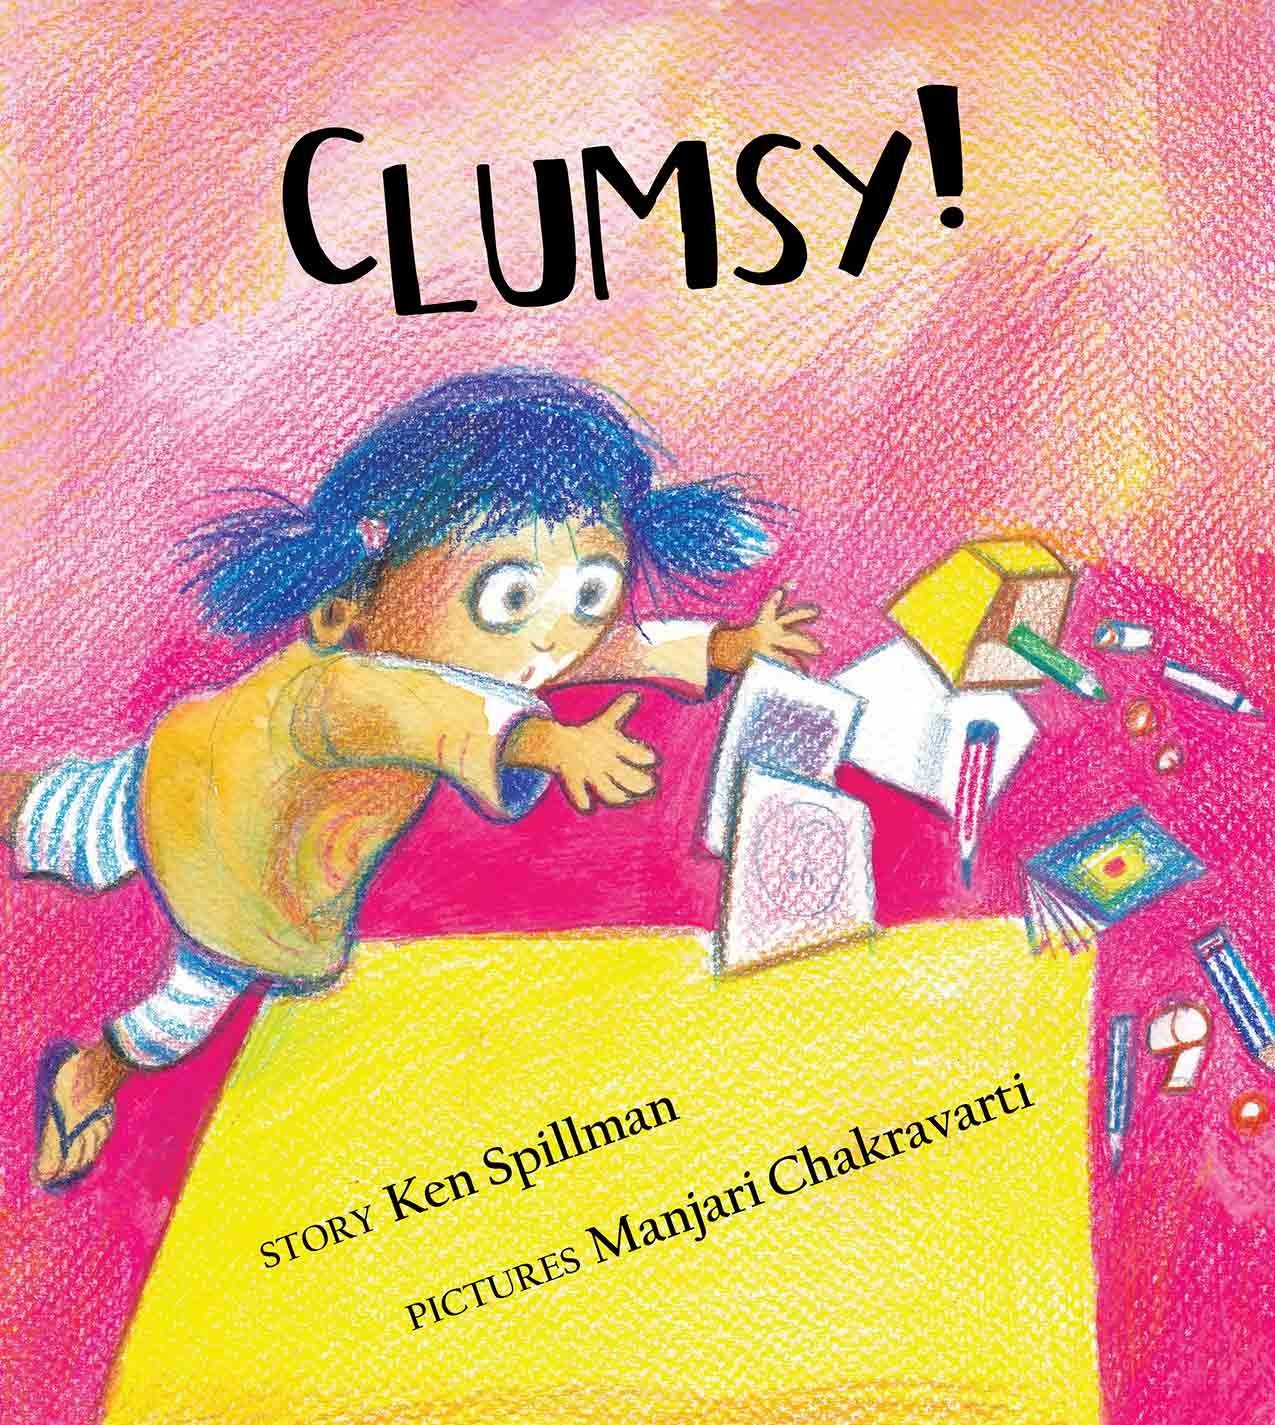 Clumsy!